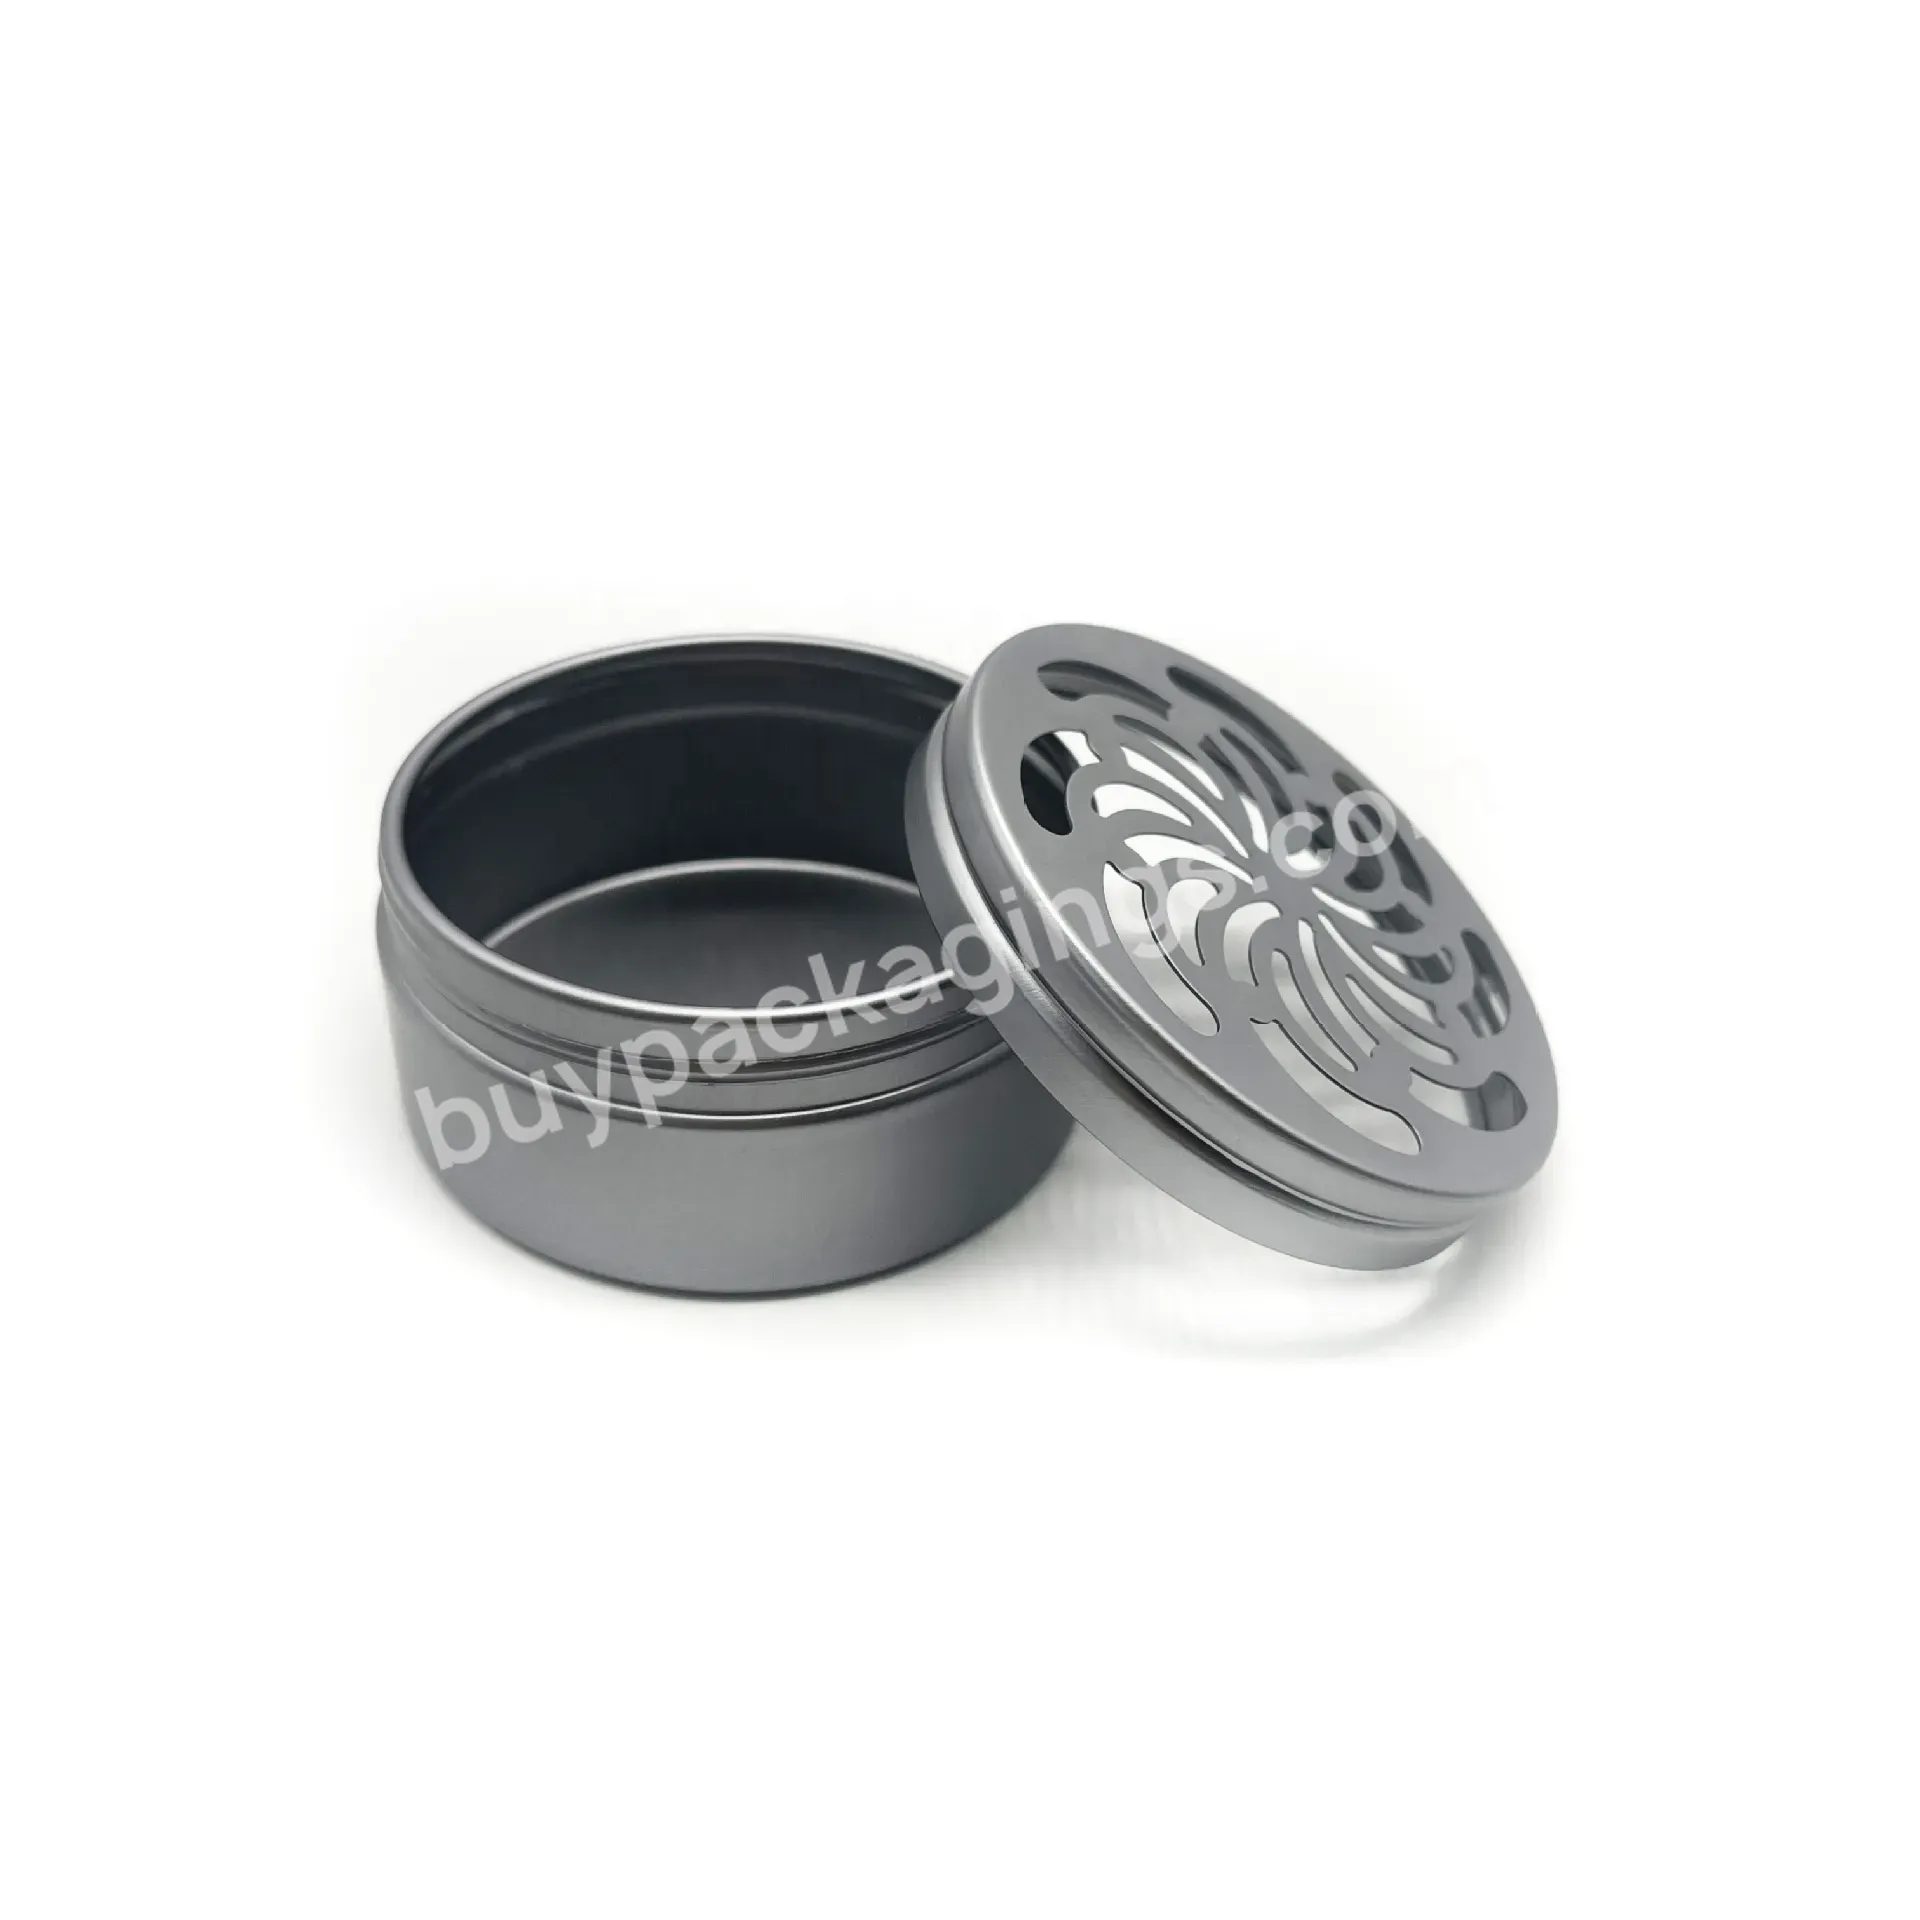 100g Grey Metal Tin With Hole Cap Empty Aluminum Air Freshener Container Solid Perfume Jar